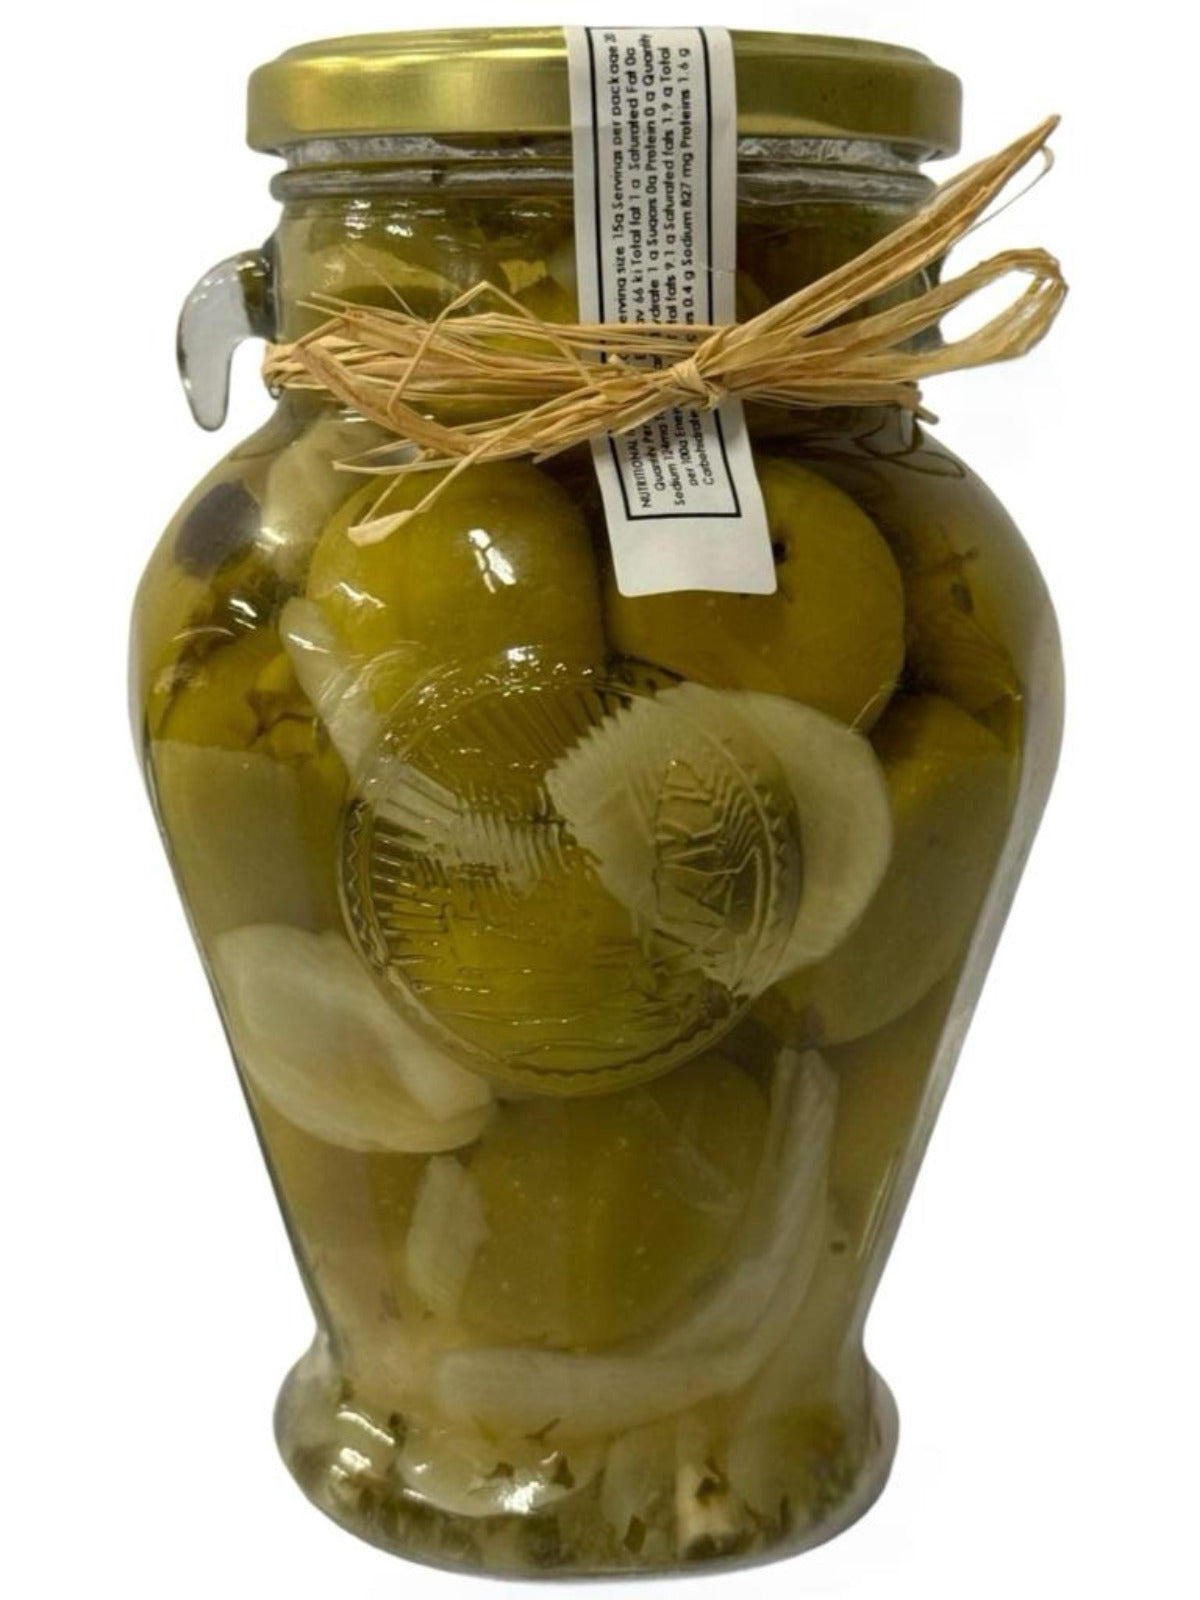 Torremar Spanish Pitted Queen Olives La Abuela Recipe 580g Best Before April 2027